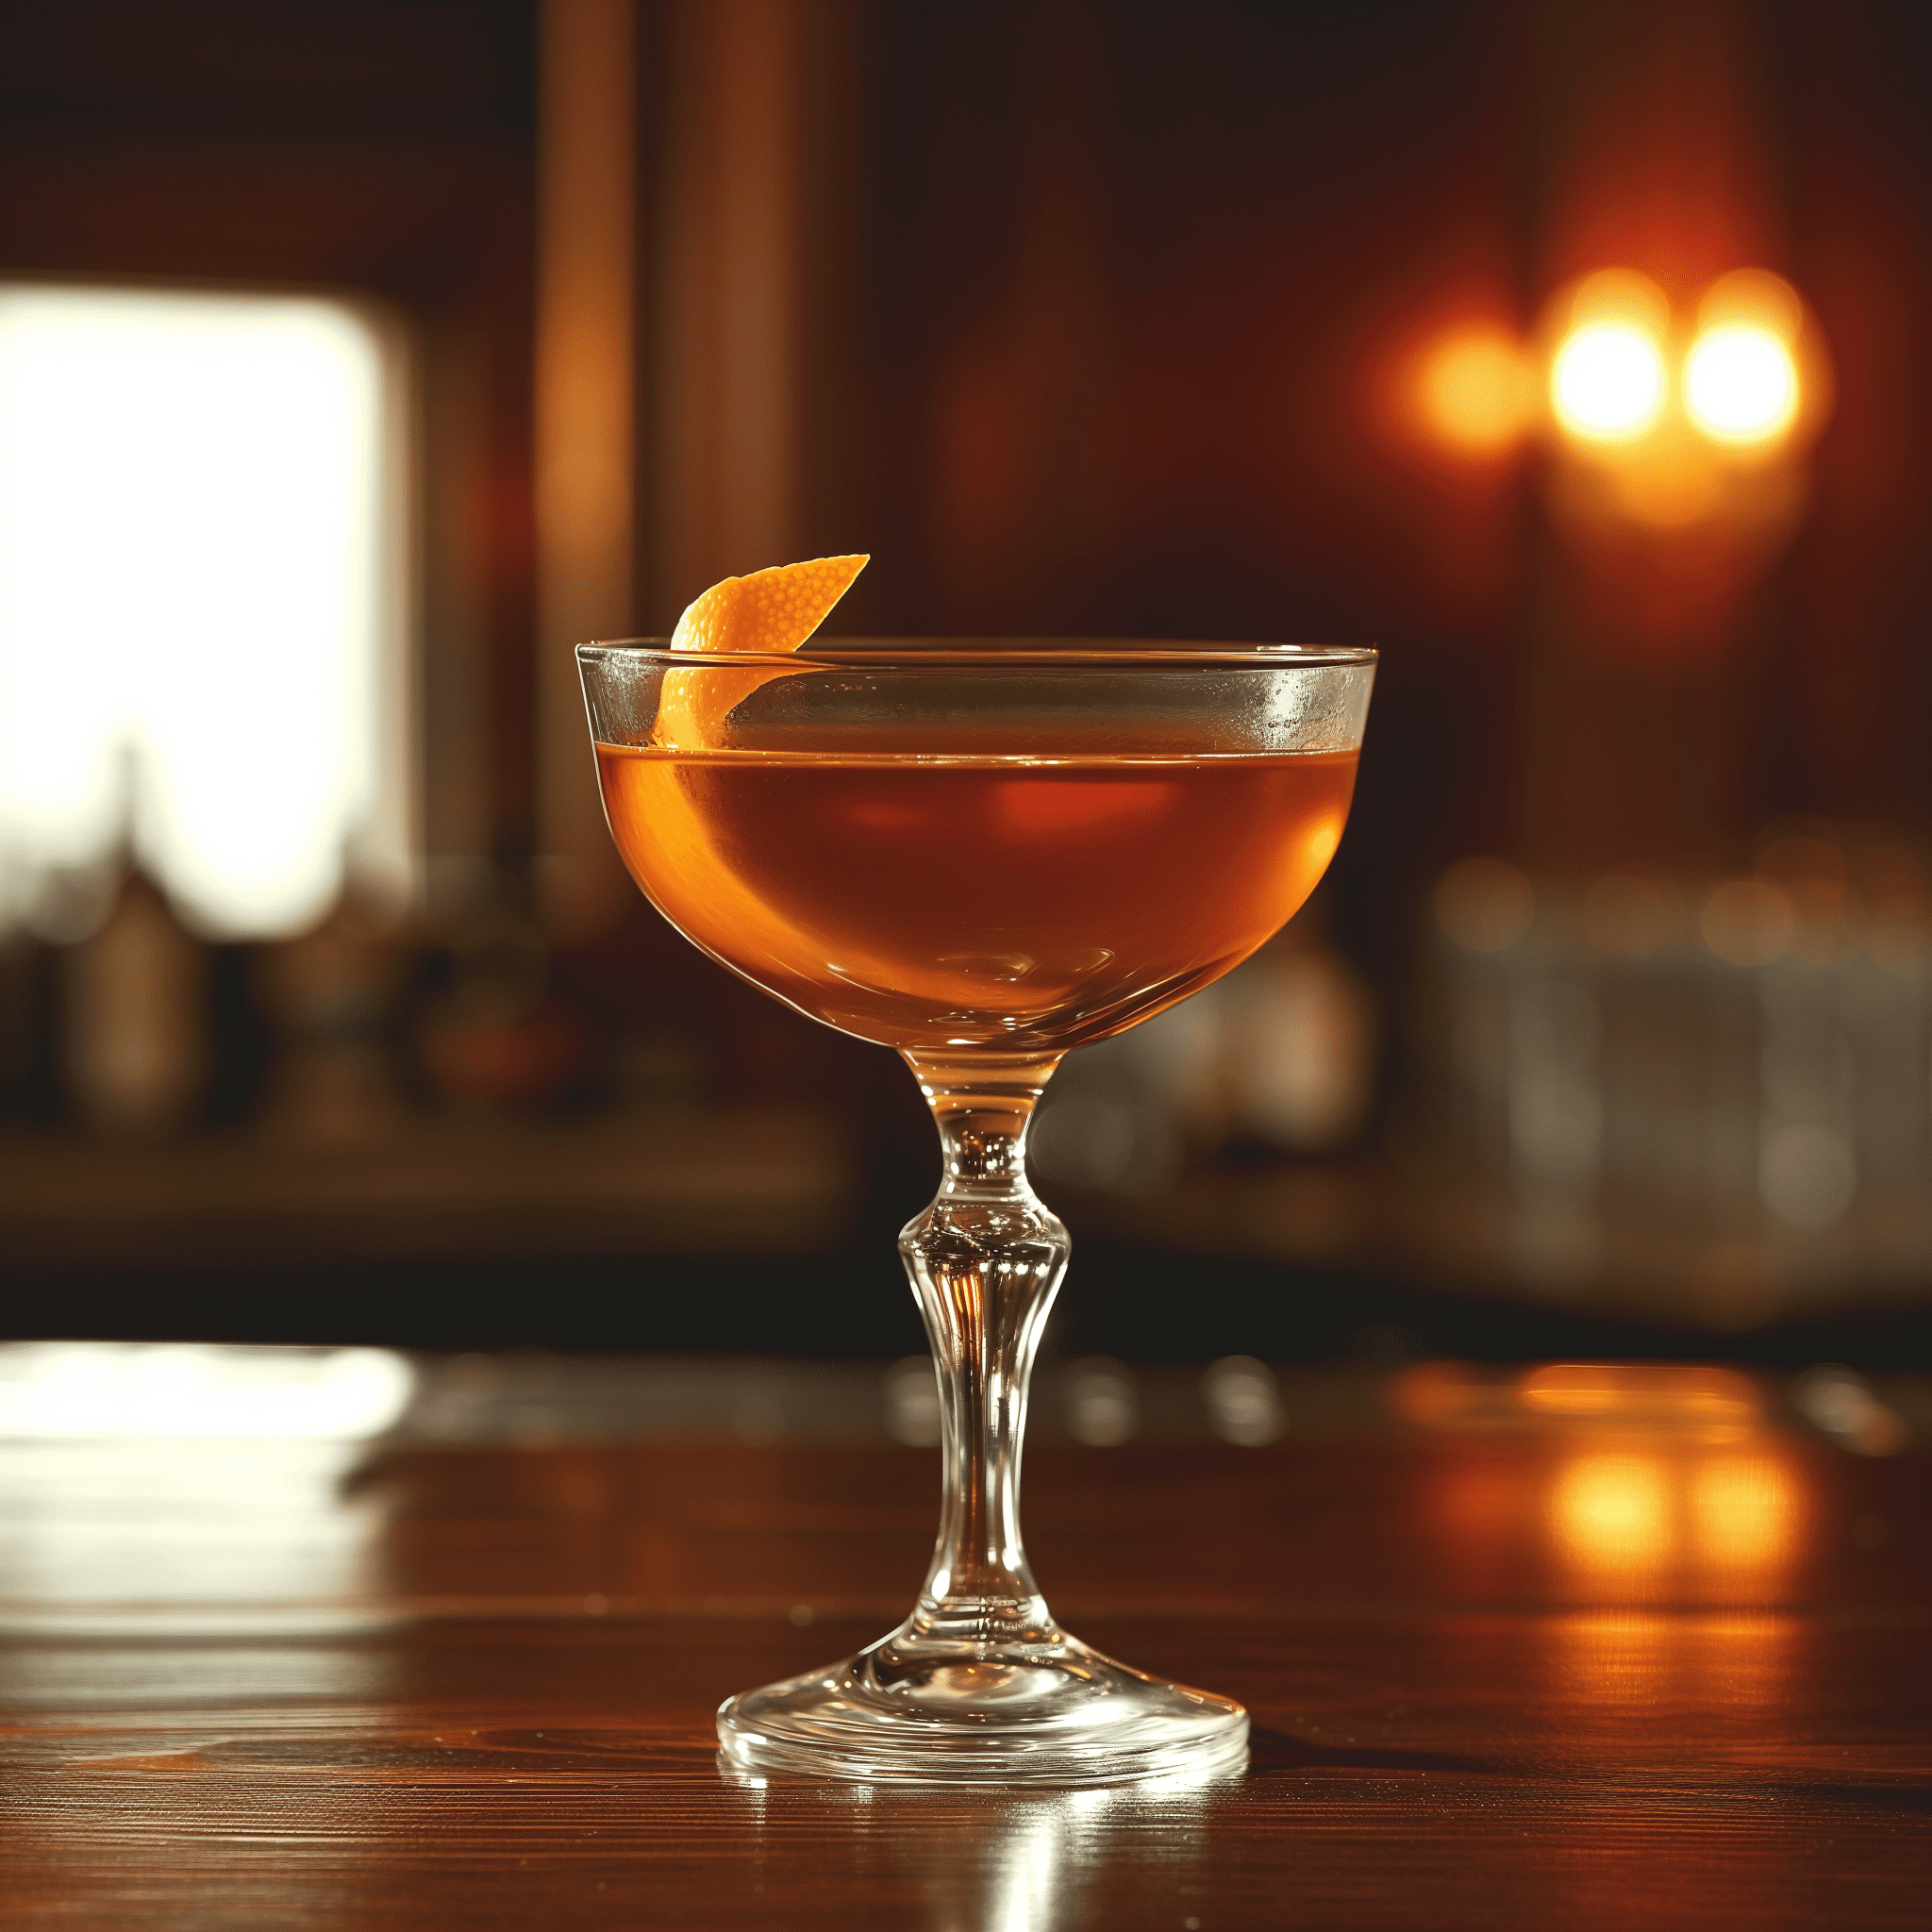 Burnt Fuselage Cocktail Recipe - The Burnt Fuselage offers a robust and complex flavor profile. The cognac provides a deep, rich base with hints of oak and vanilla, while the dry vermouth adds a herbal and slightly bitter counterpoint. The Grand Marnier brings a sweet and subtly citrus note, creating a well-rounded and sophisticated taste.